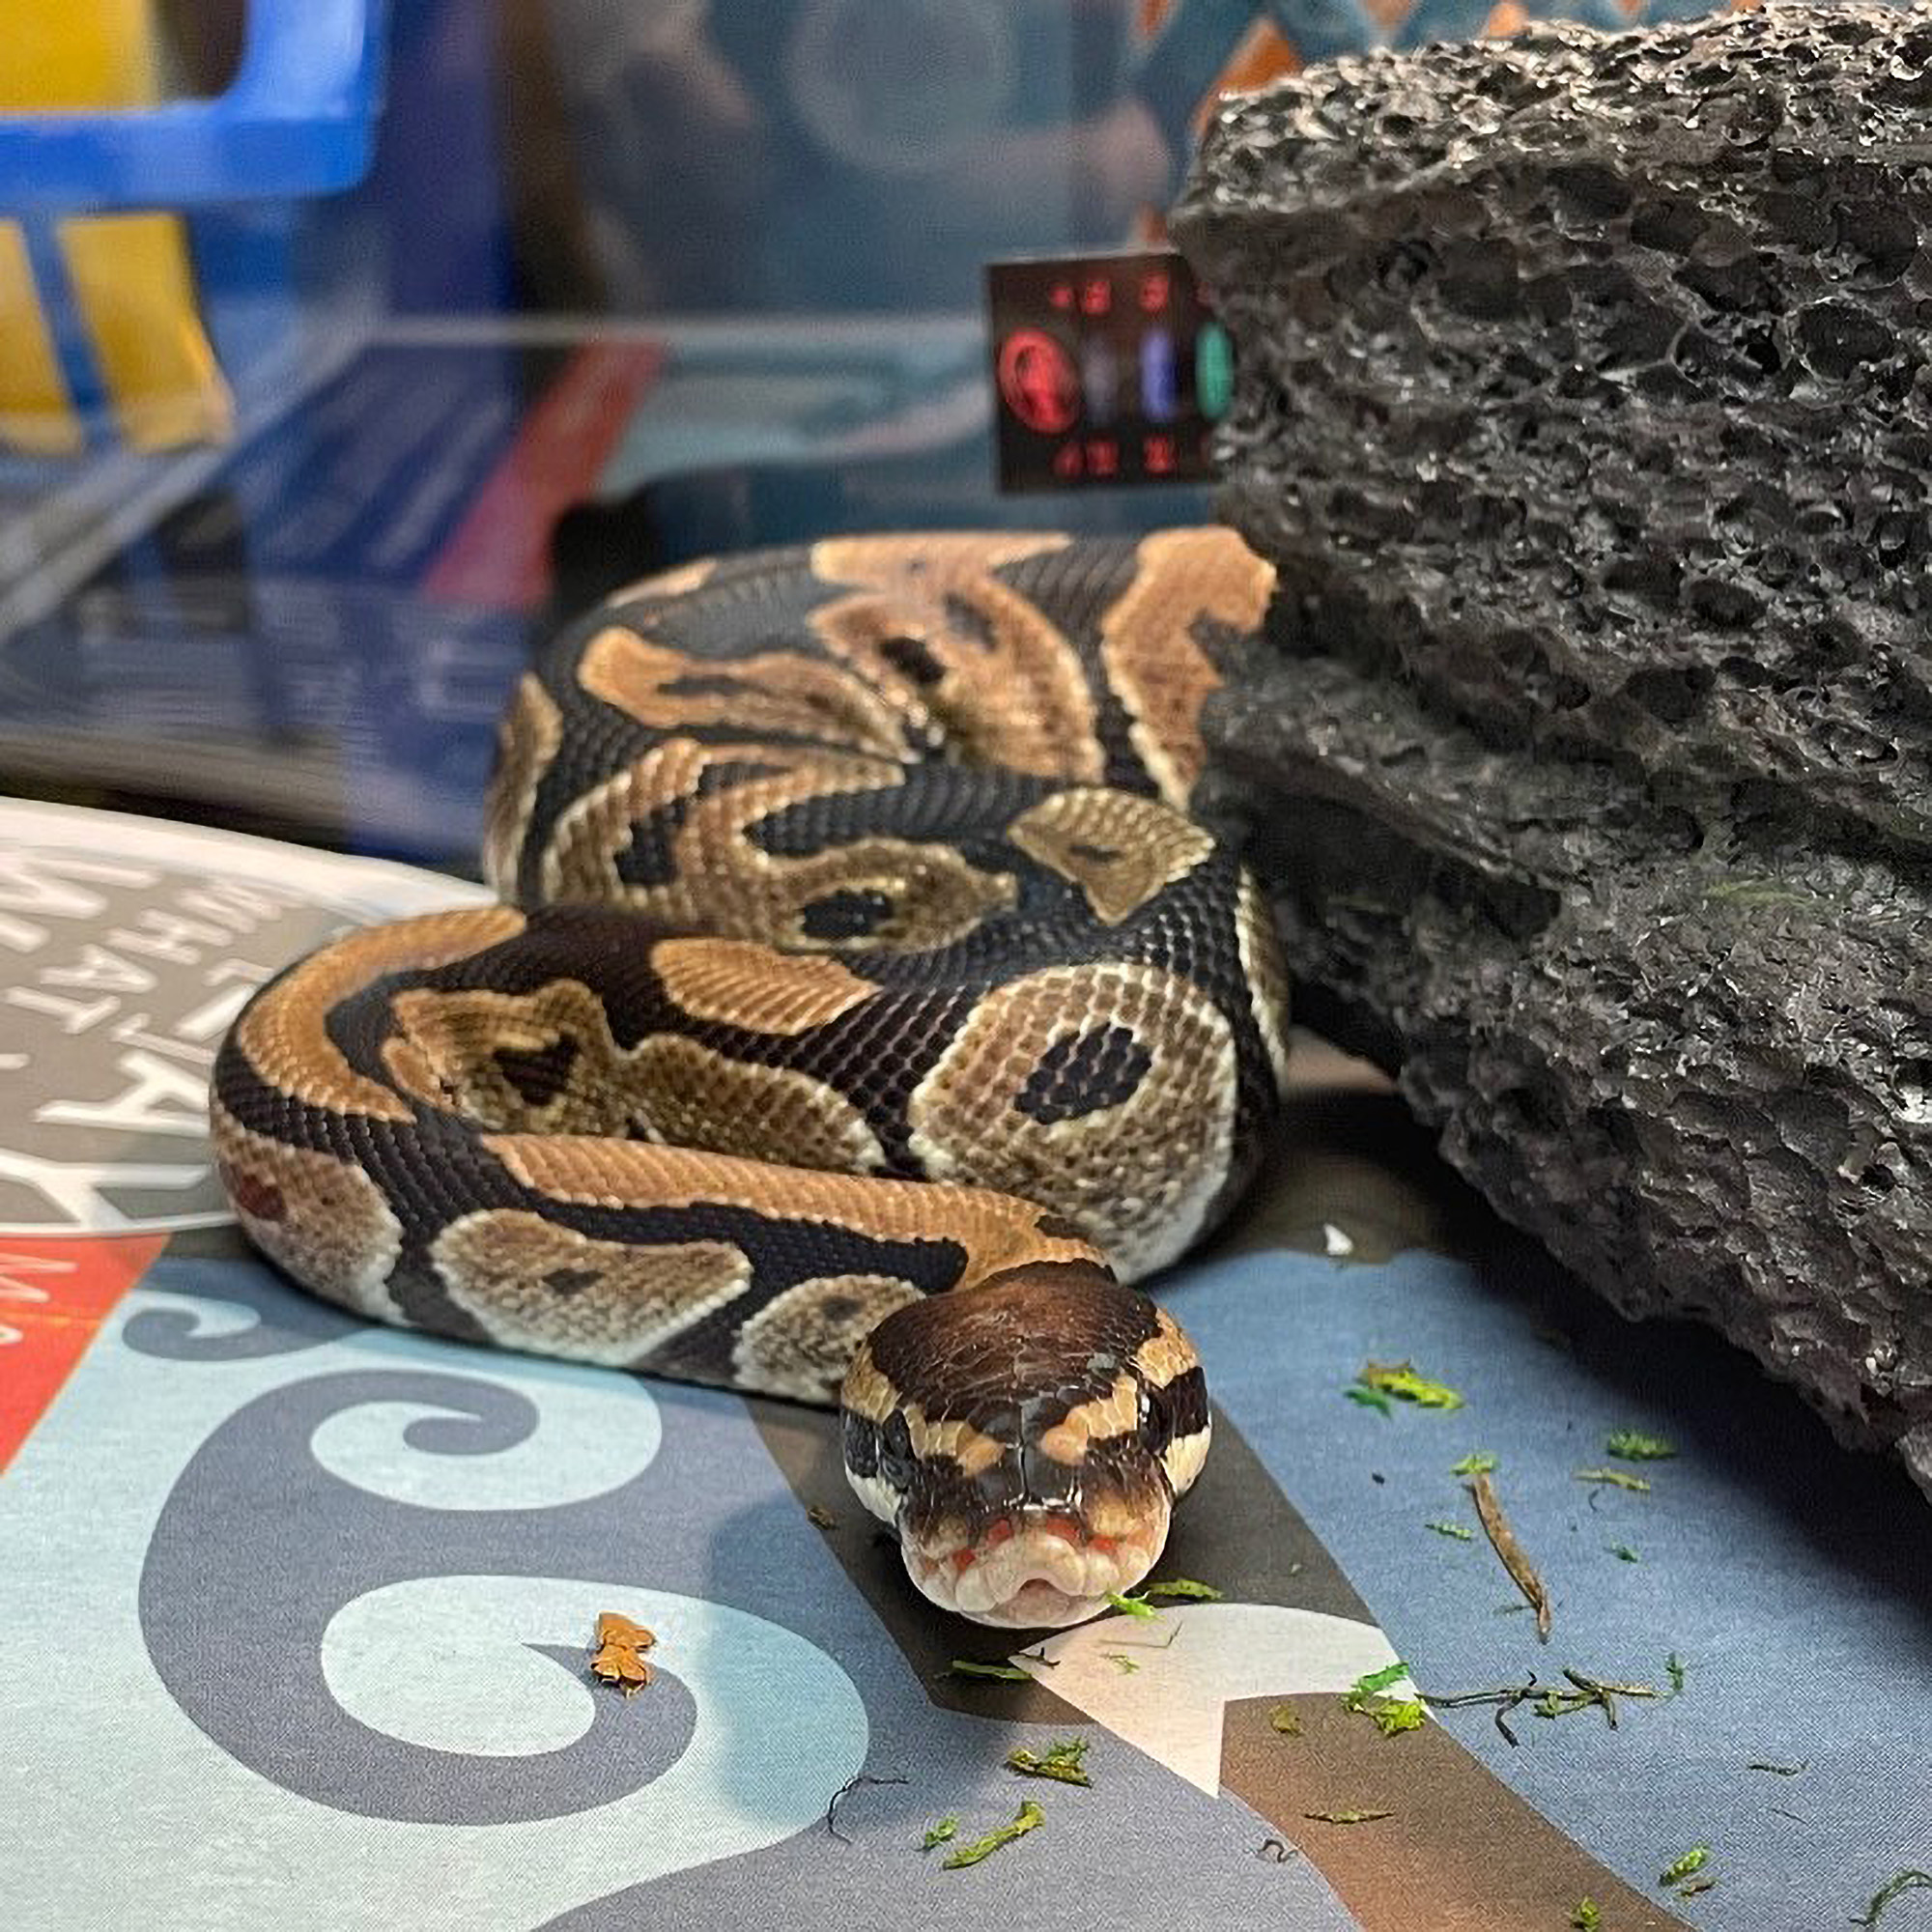 Read more about the article Wolverine The Python Found Chilling On Shelf In Walmart Store